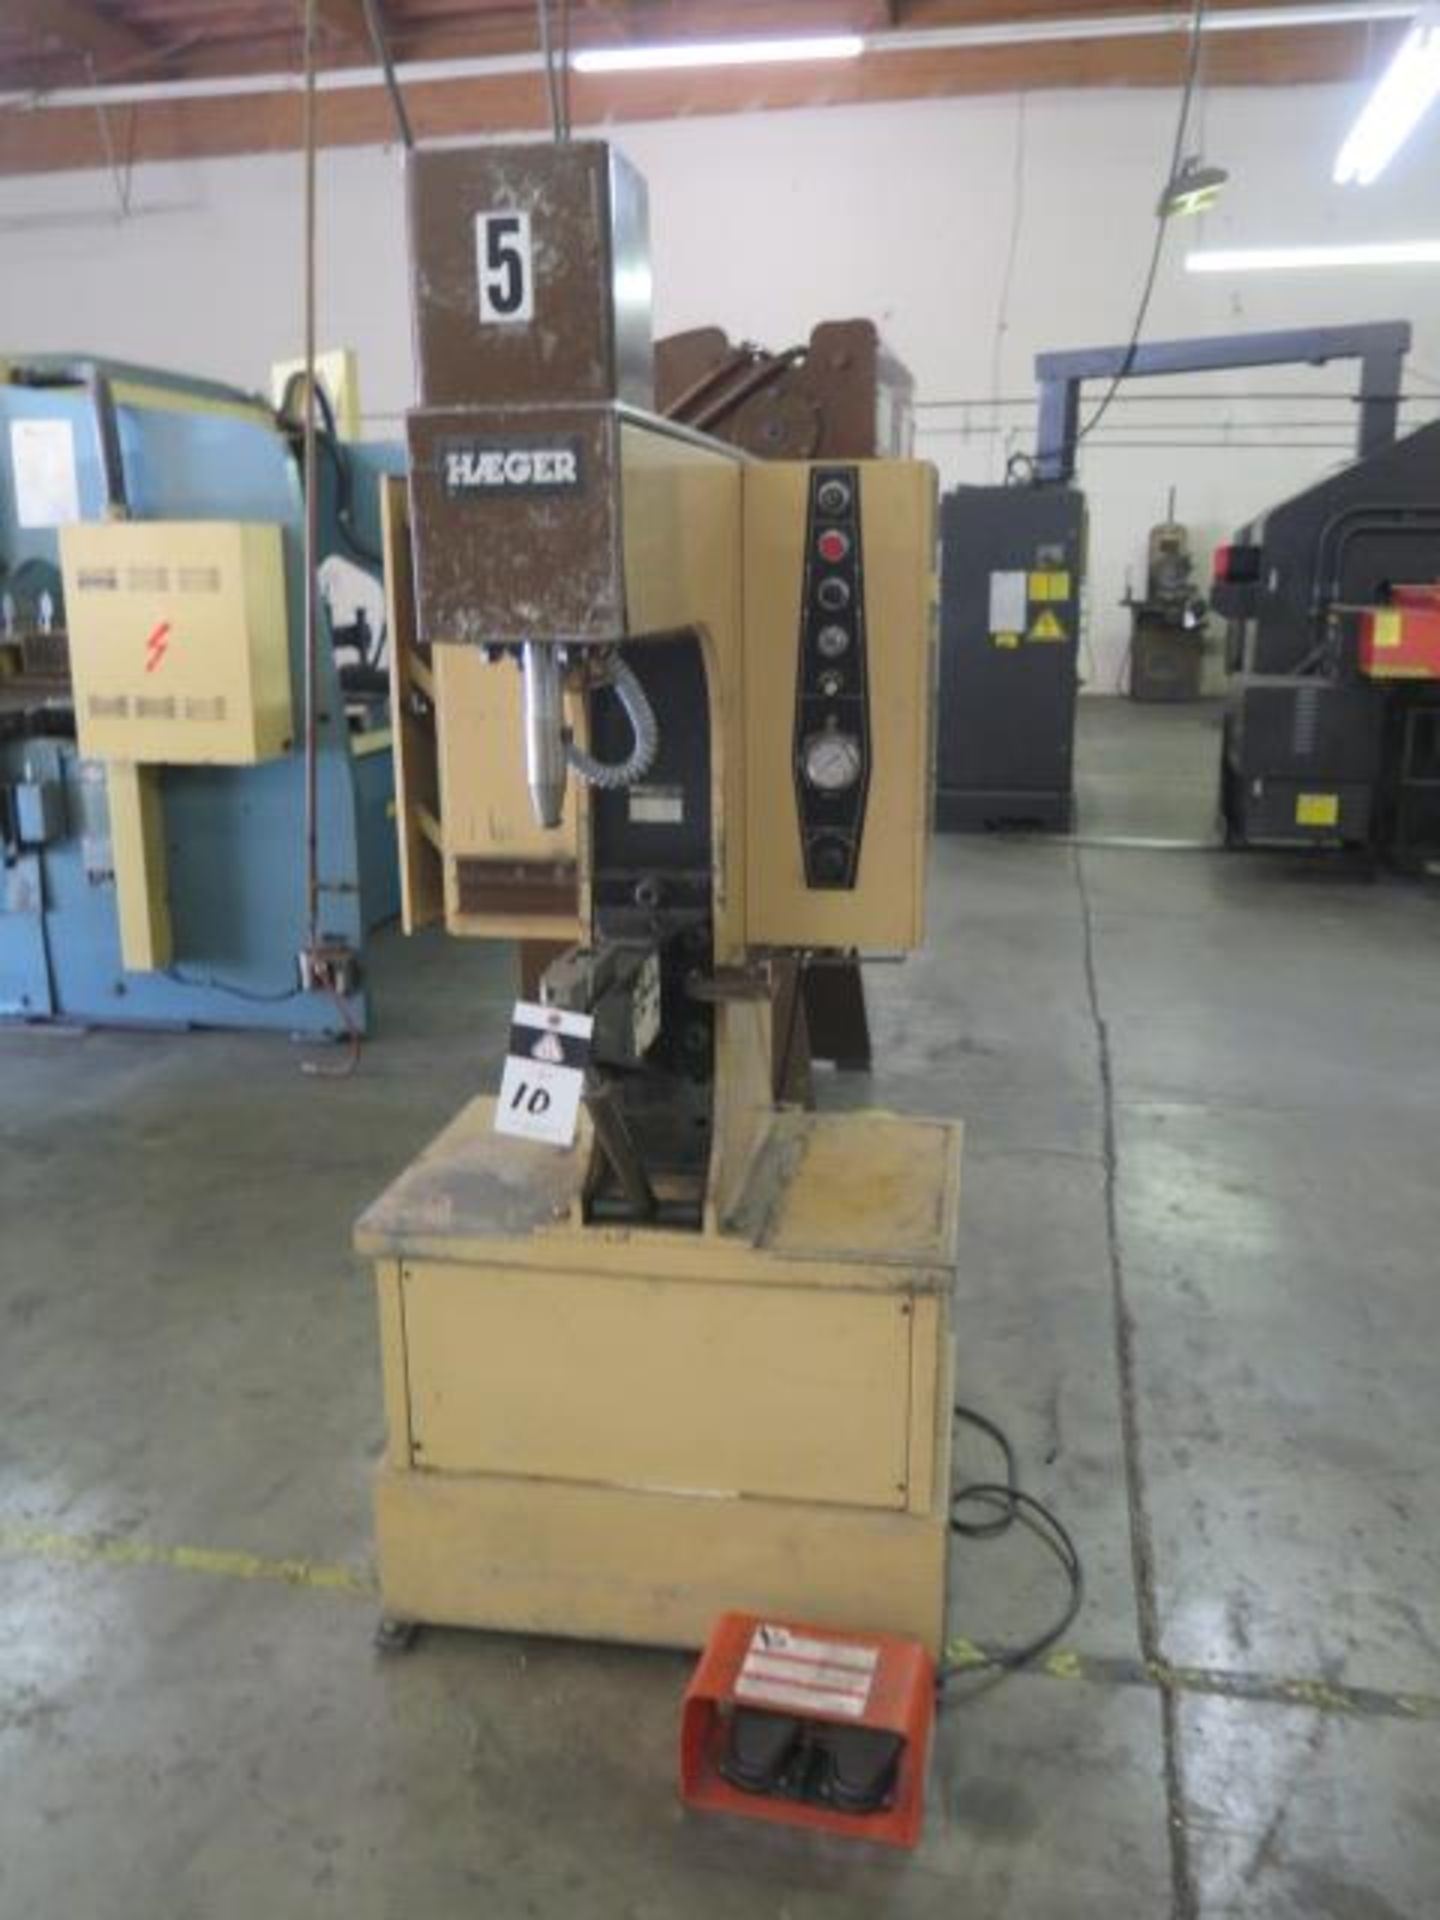 Haeger HP6-B 6 Ton x 18" Hardware Insertion Press s/n 684 (SOLD AS-IS - NO WARRANTY)